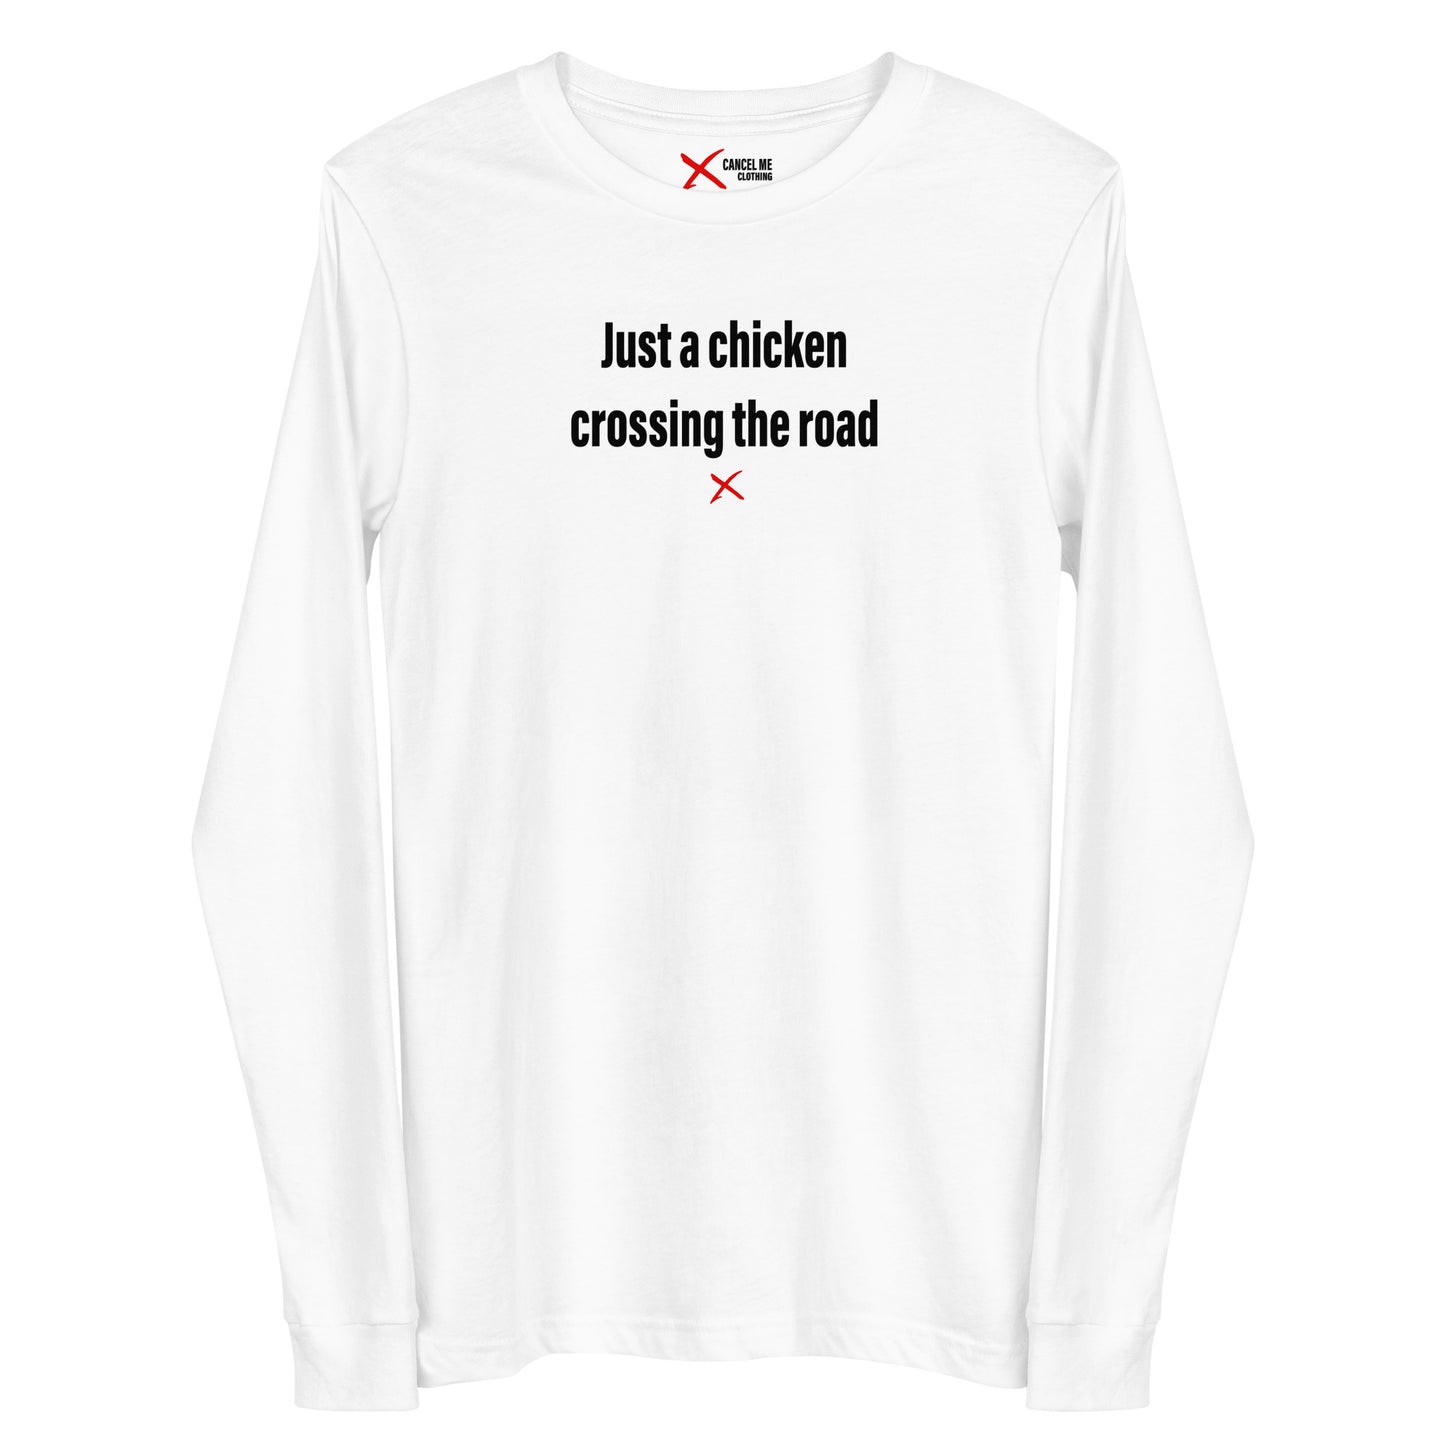 Just a chicken crossing the road - Longsleeve